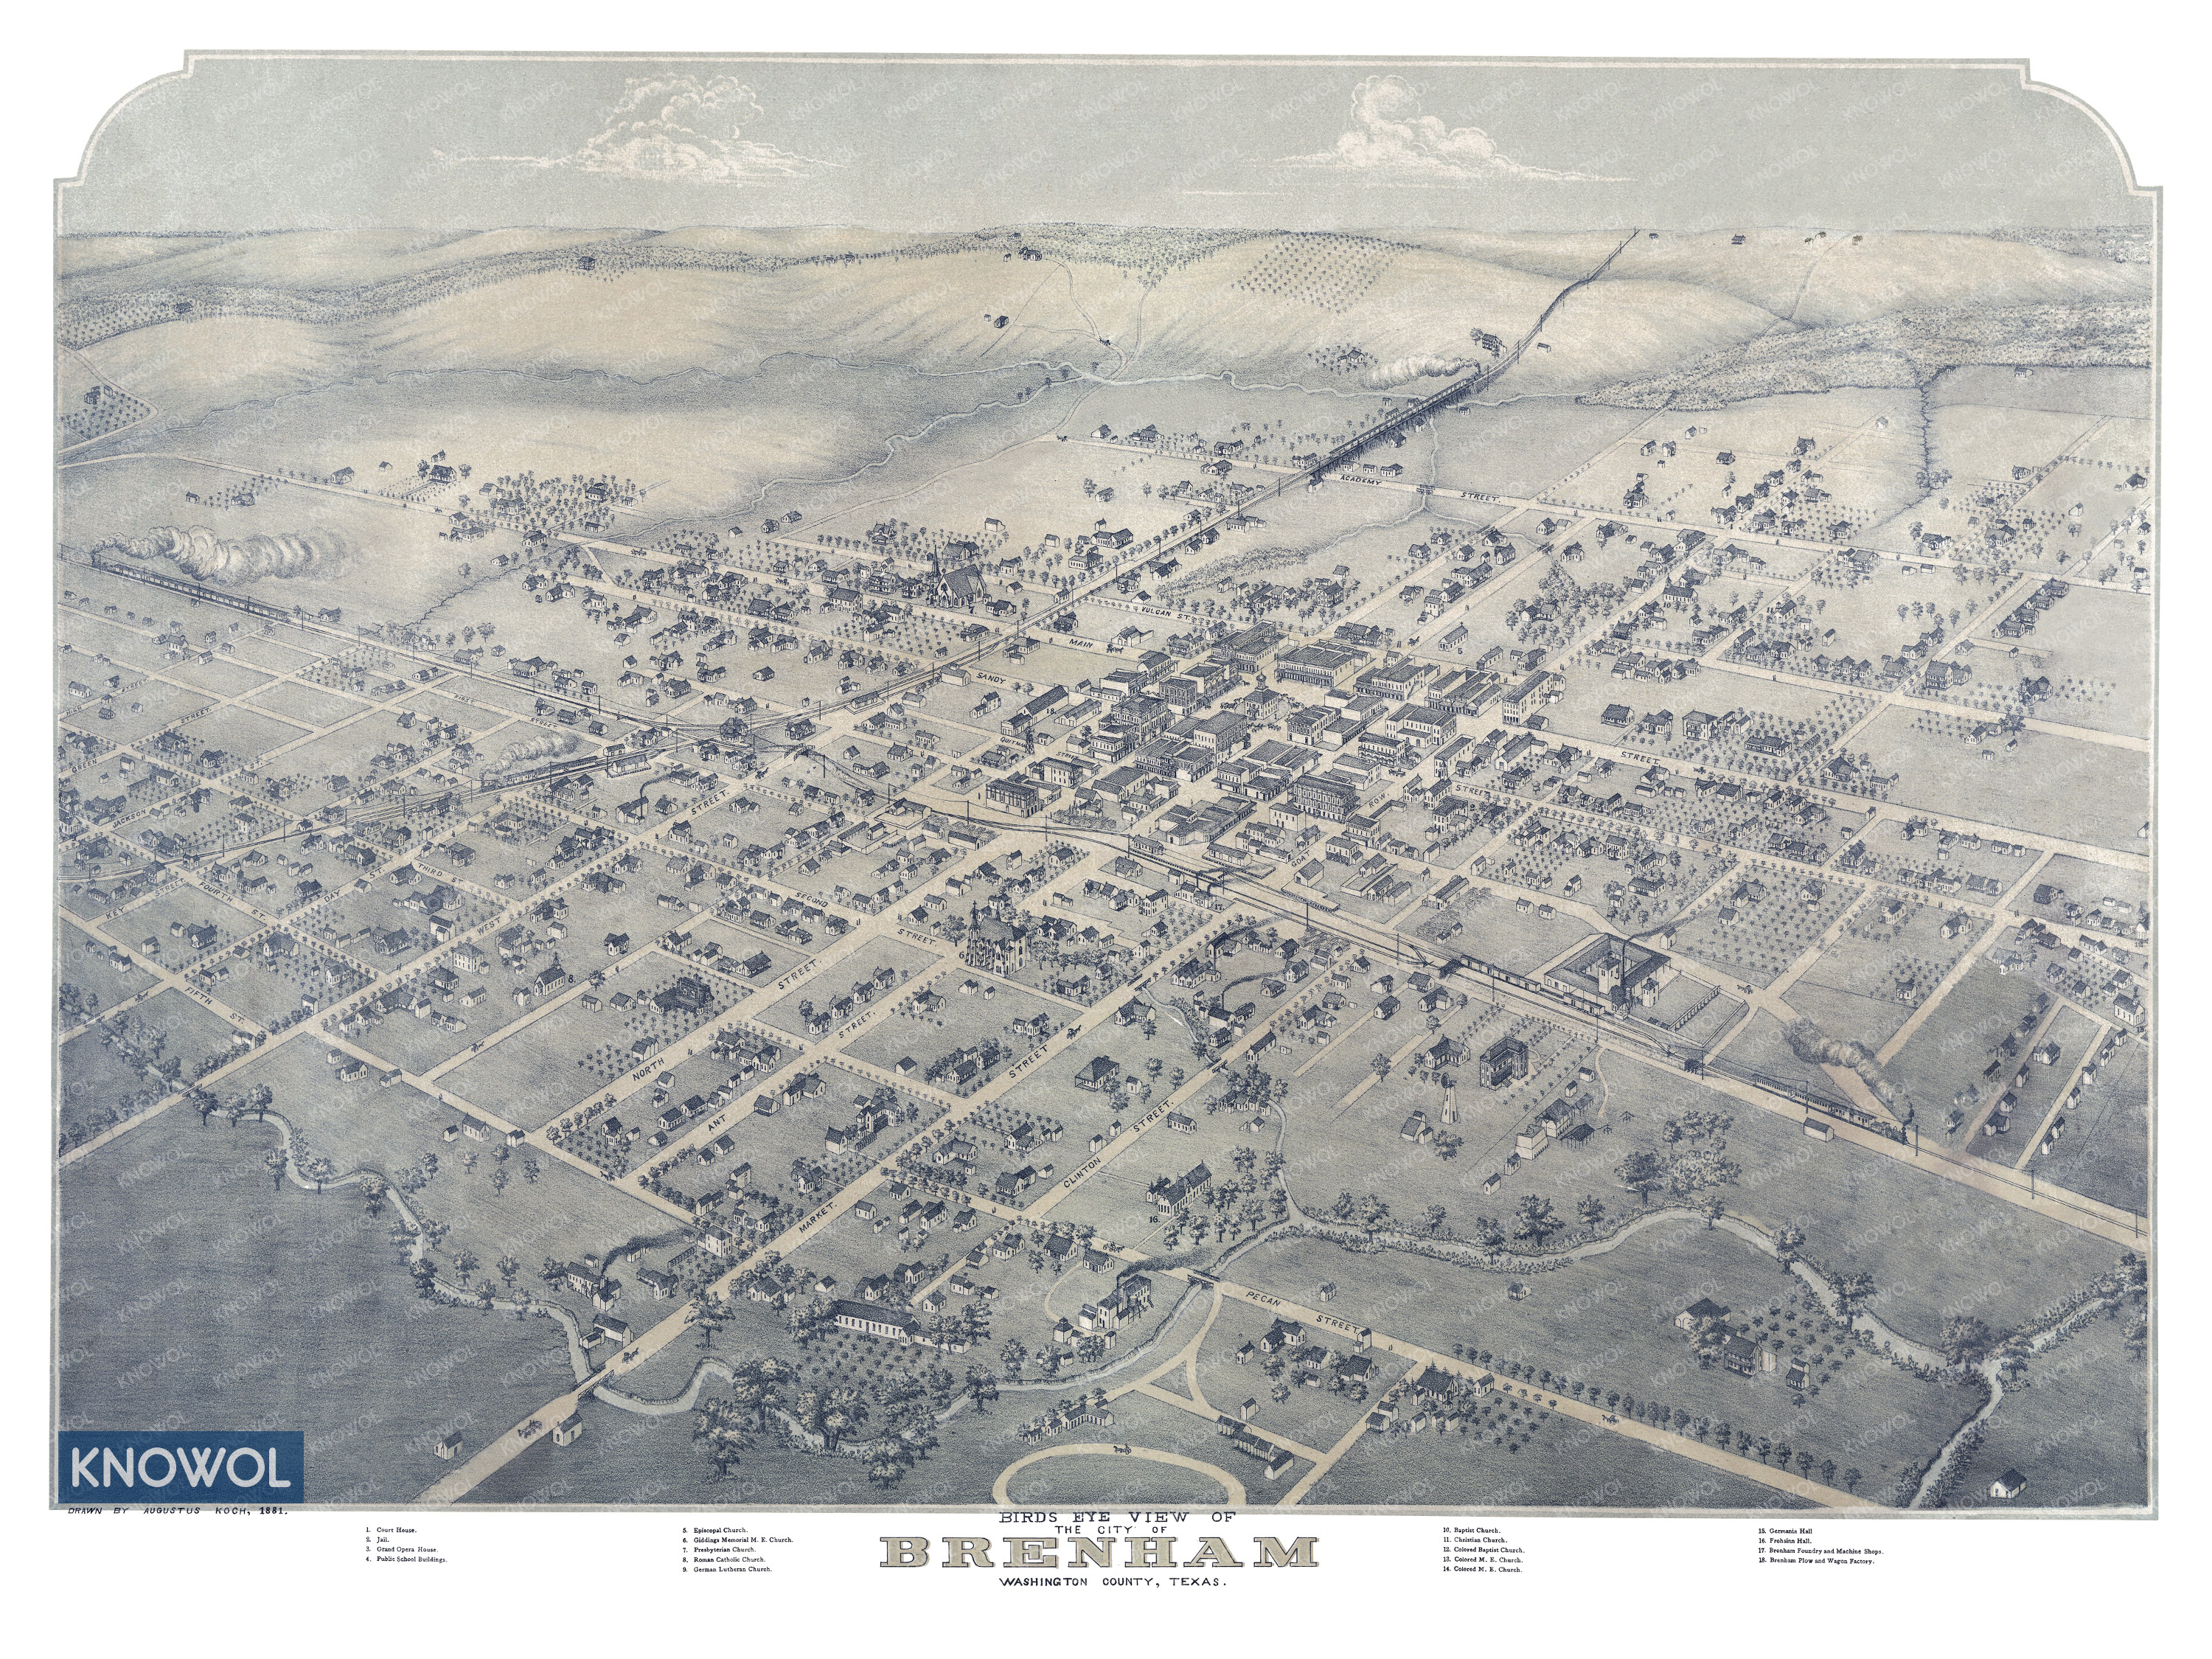 Old map of Brenham, Texas showing a bird's eye view of the city as it looked in 1881. The map has streets labeled and shows old historic landmarks in Brenham, Texas.